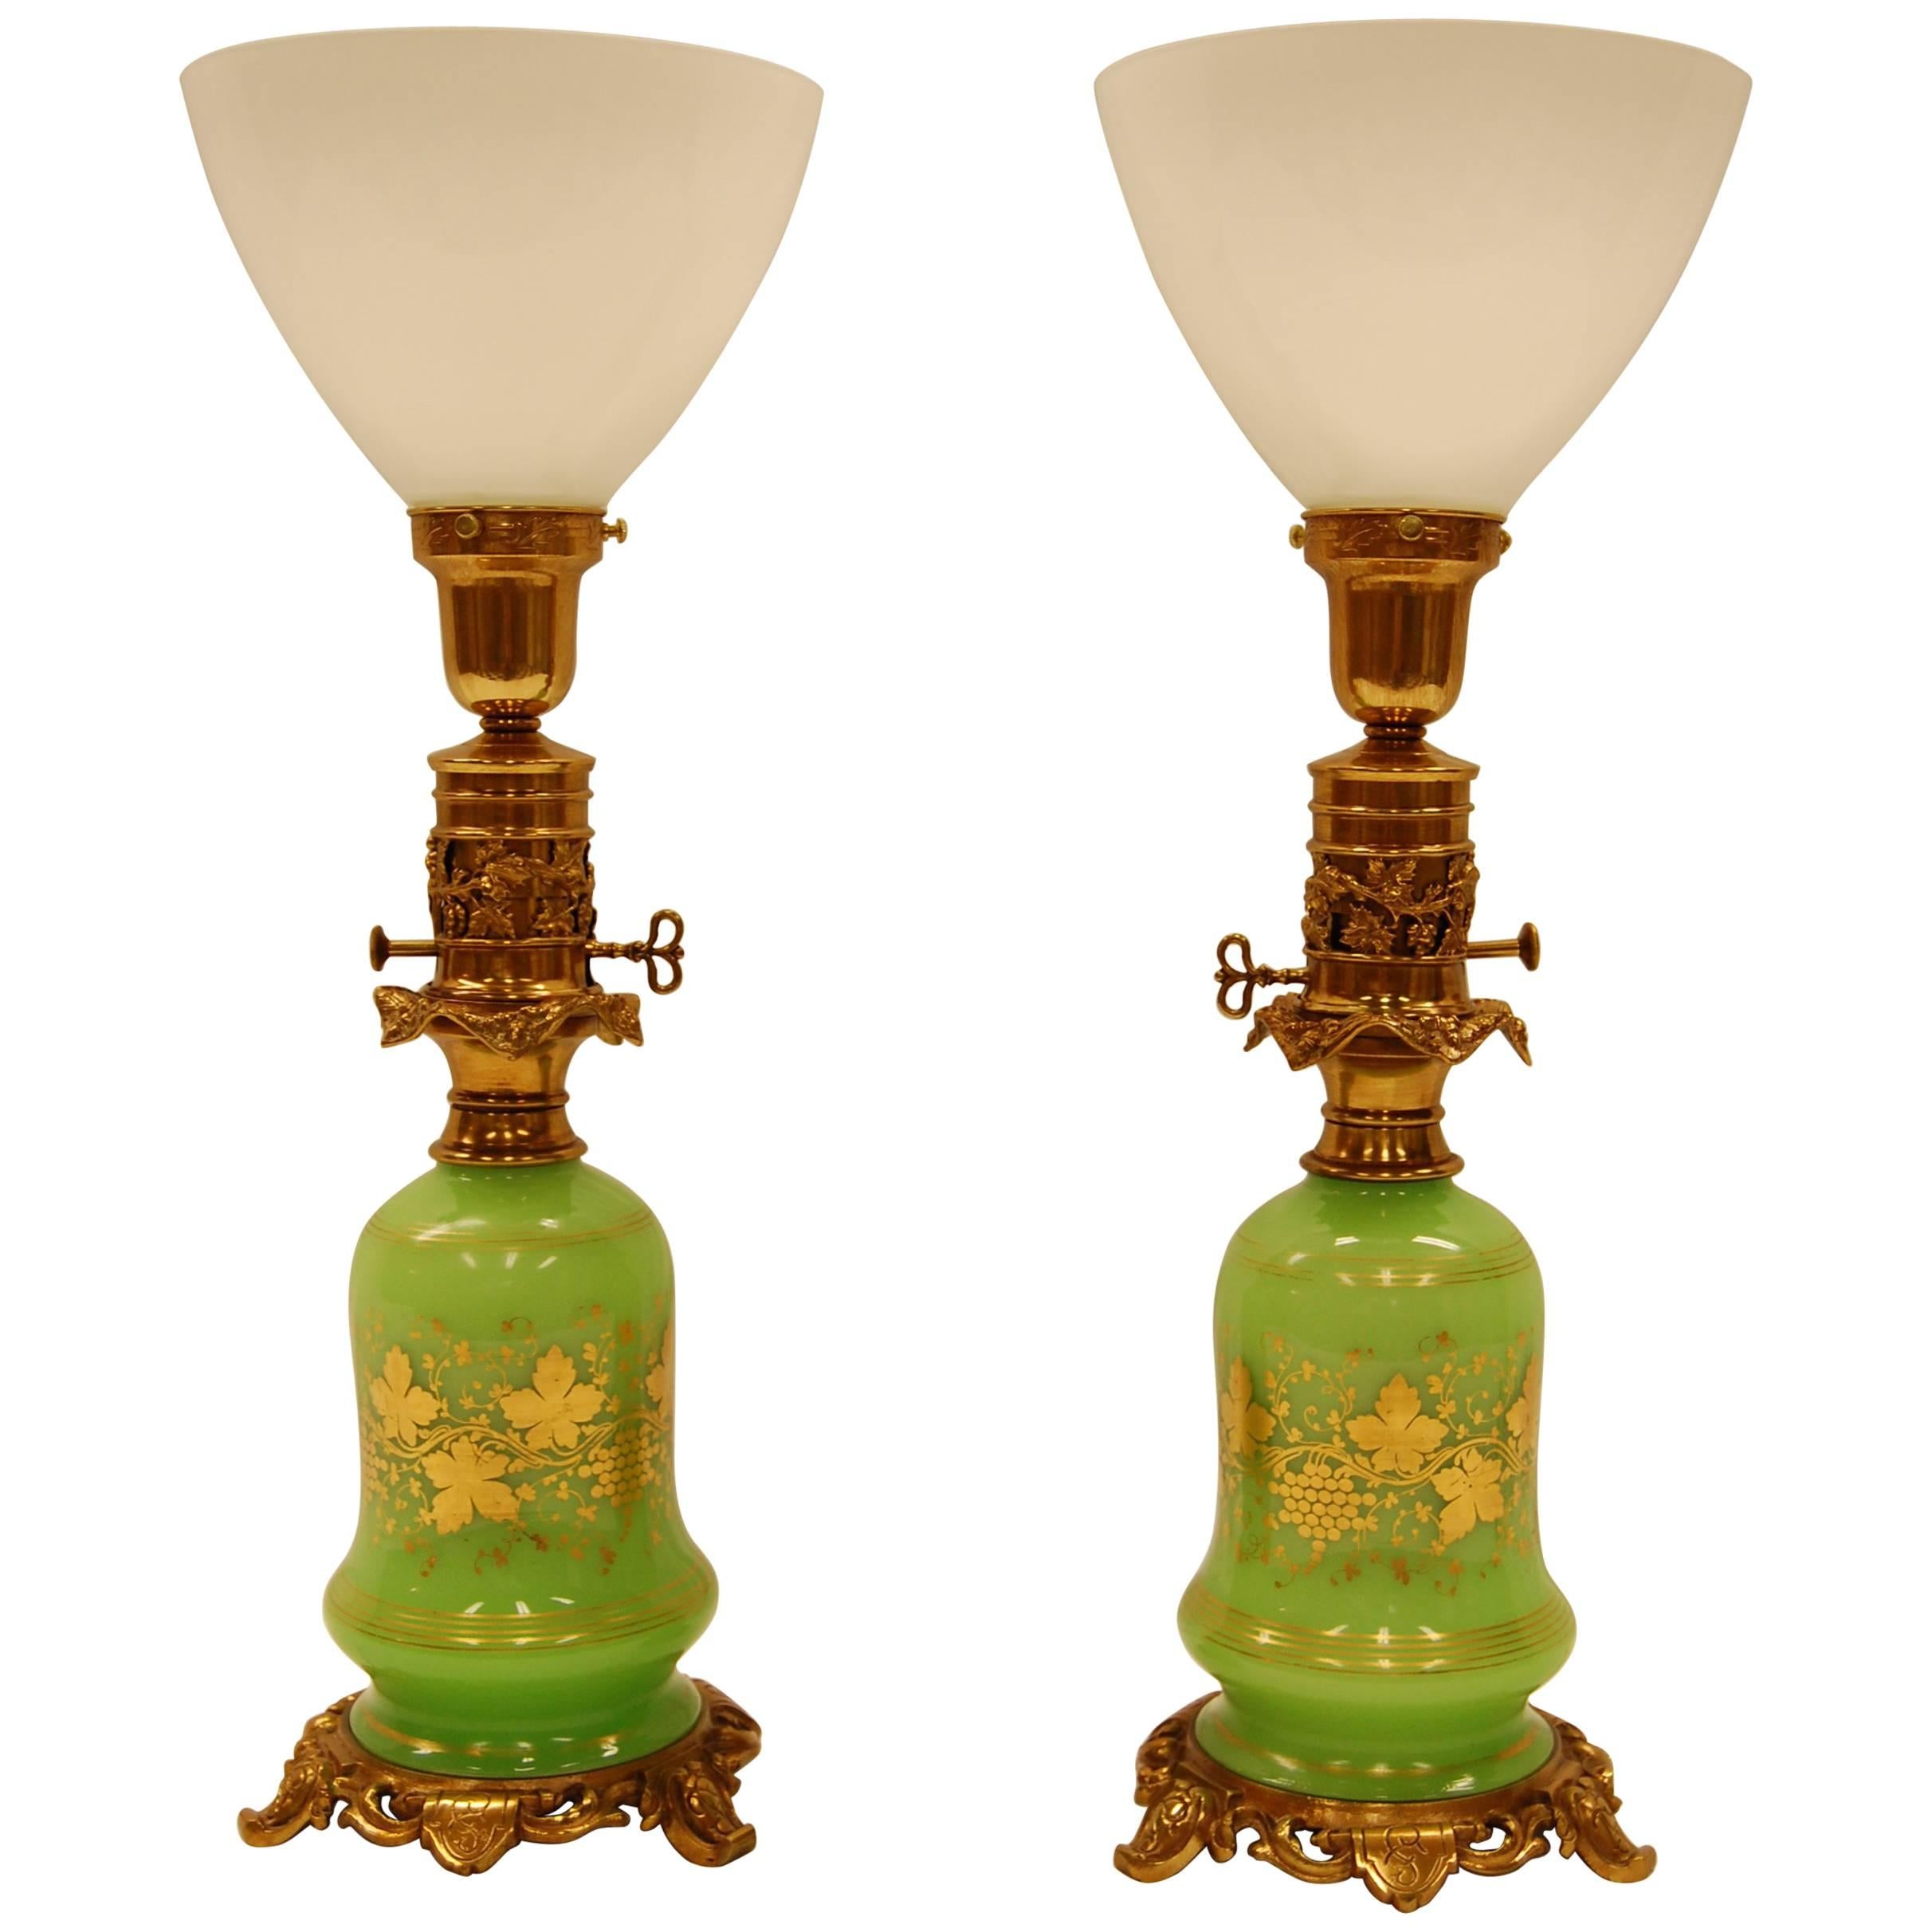 Pair of Green Opaline Gold Leaf Decorated French Oil Lamps, circa 1860